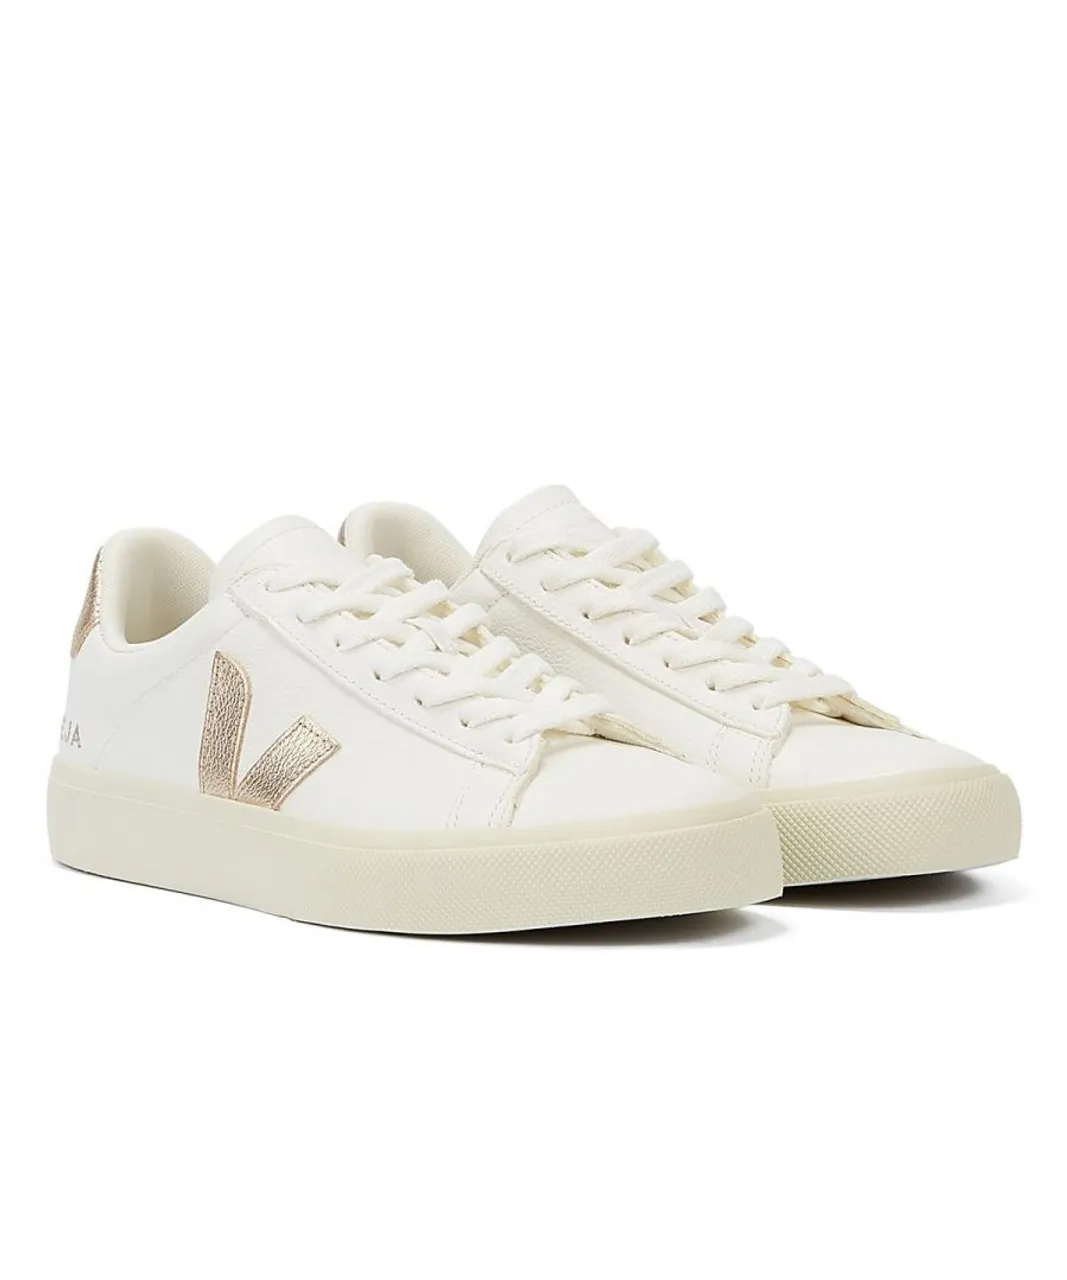 Veja Campo Platine WoMens White/Gold Trainers Leather